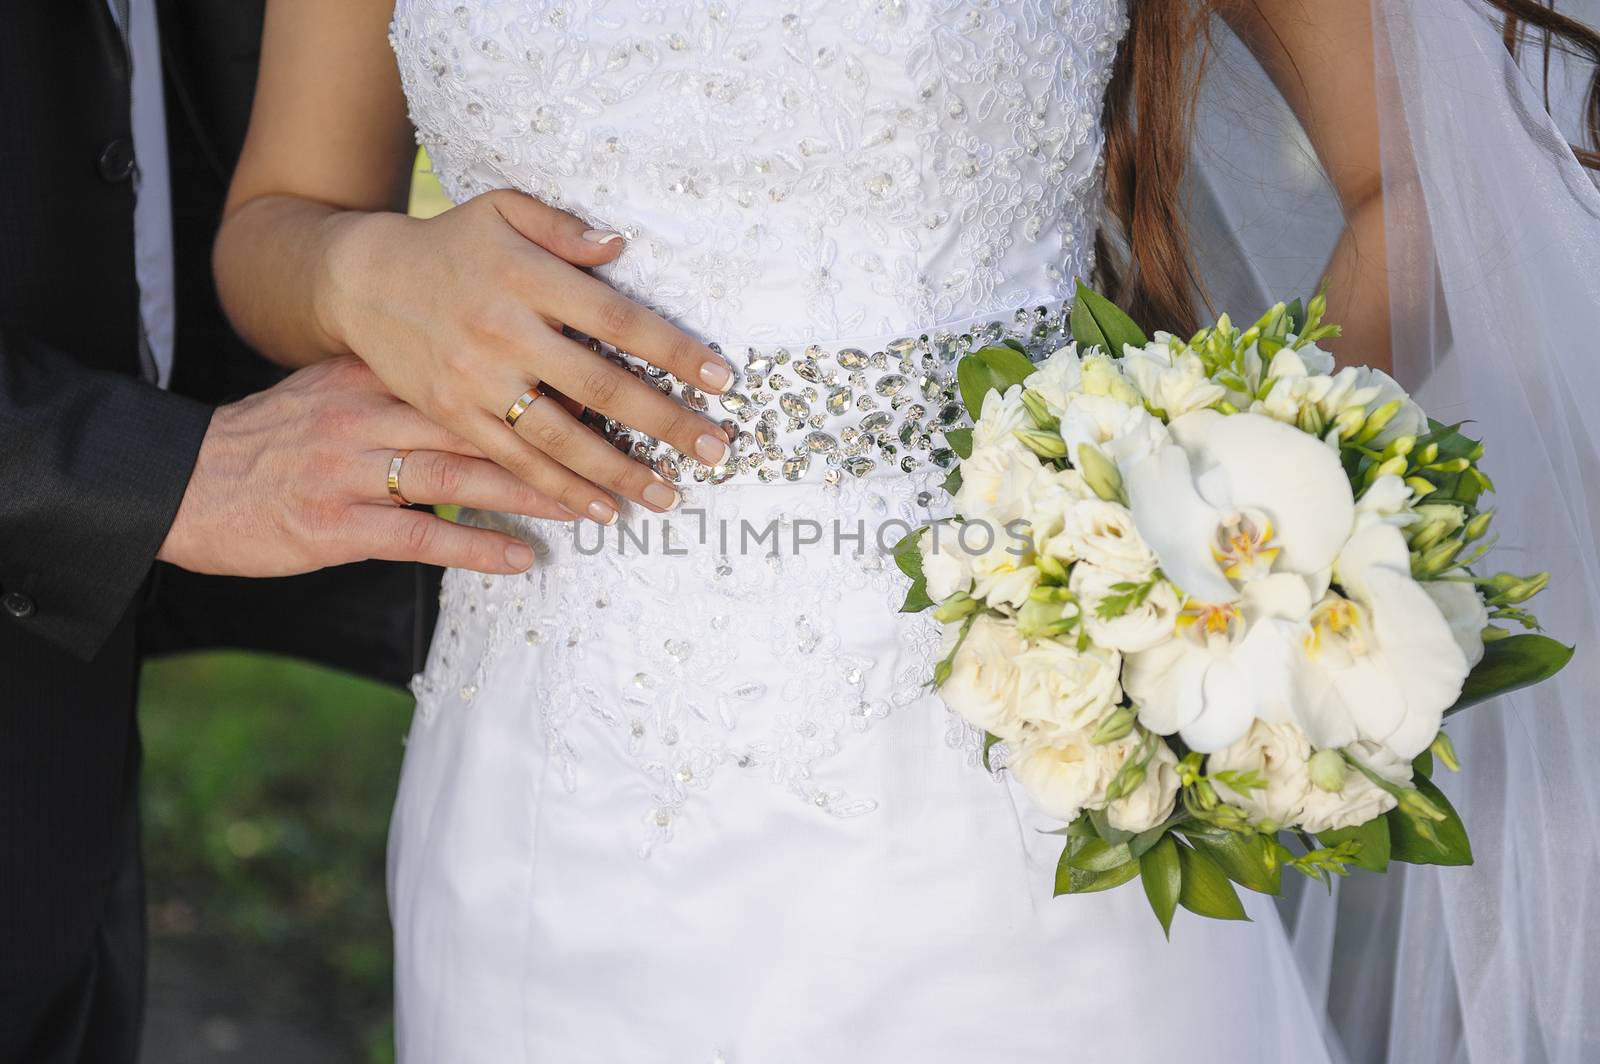 Bride holding white wedding bouquet of roses and love flower